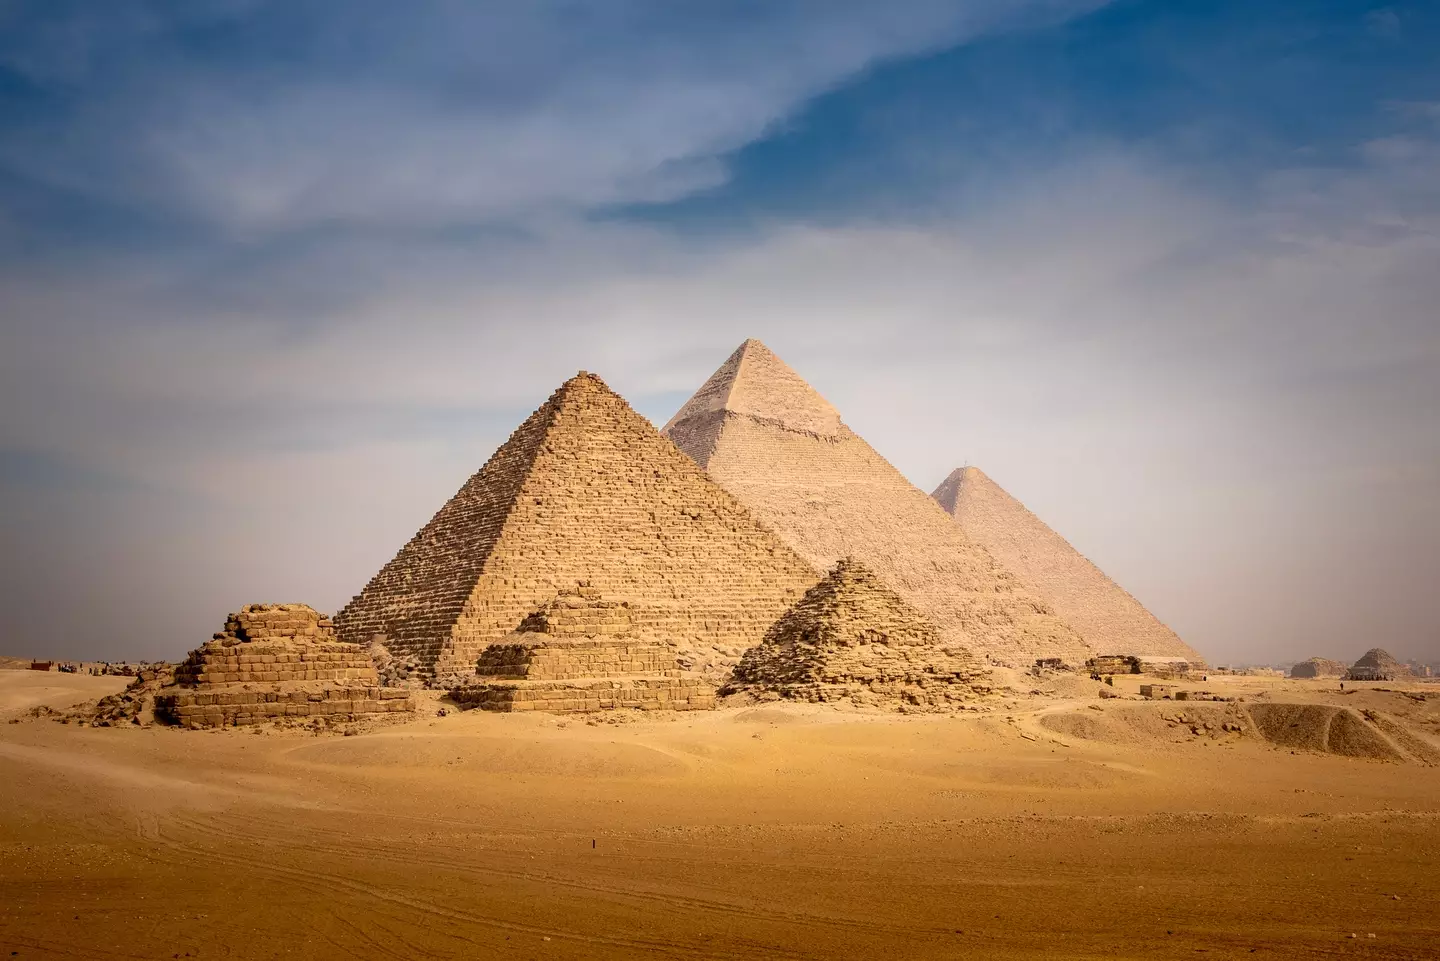 Pyramids of Giza (Getty Stock Images)